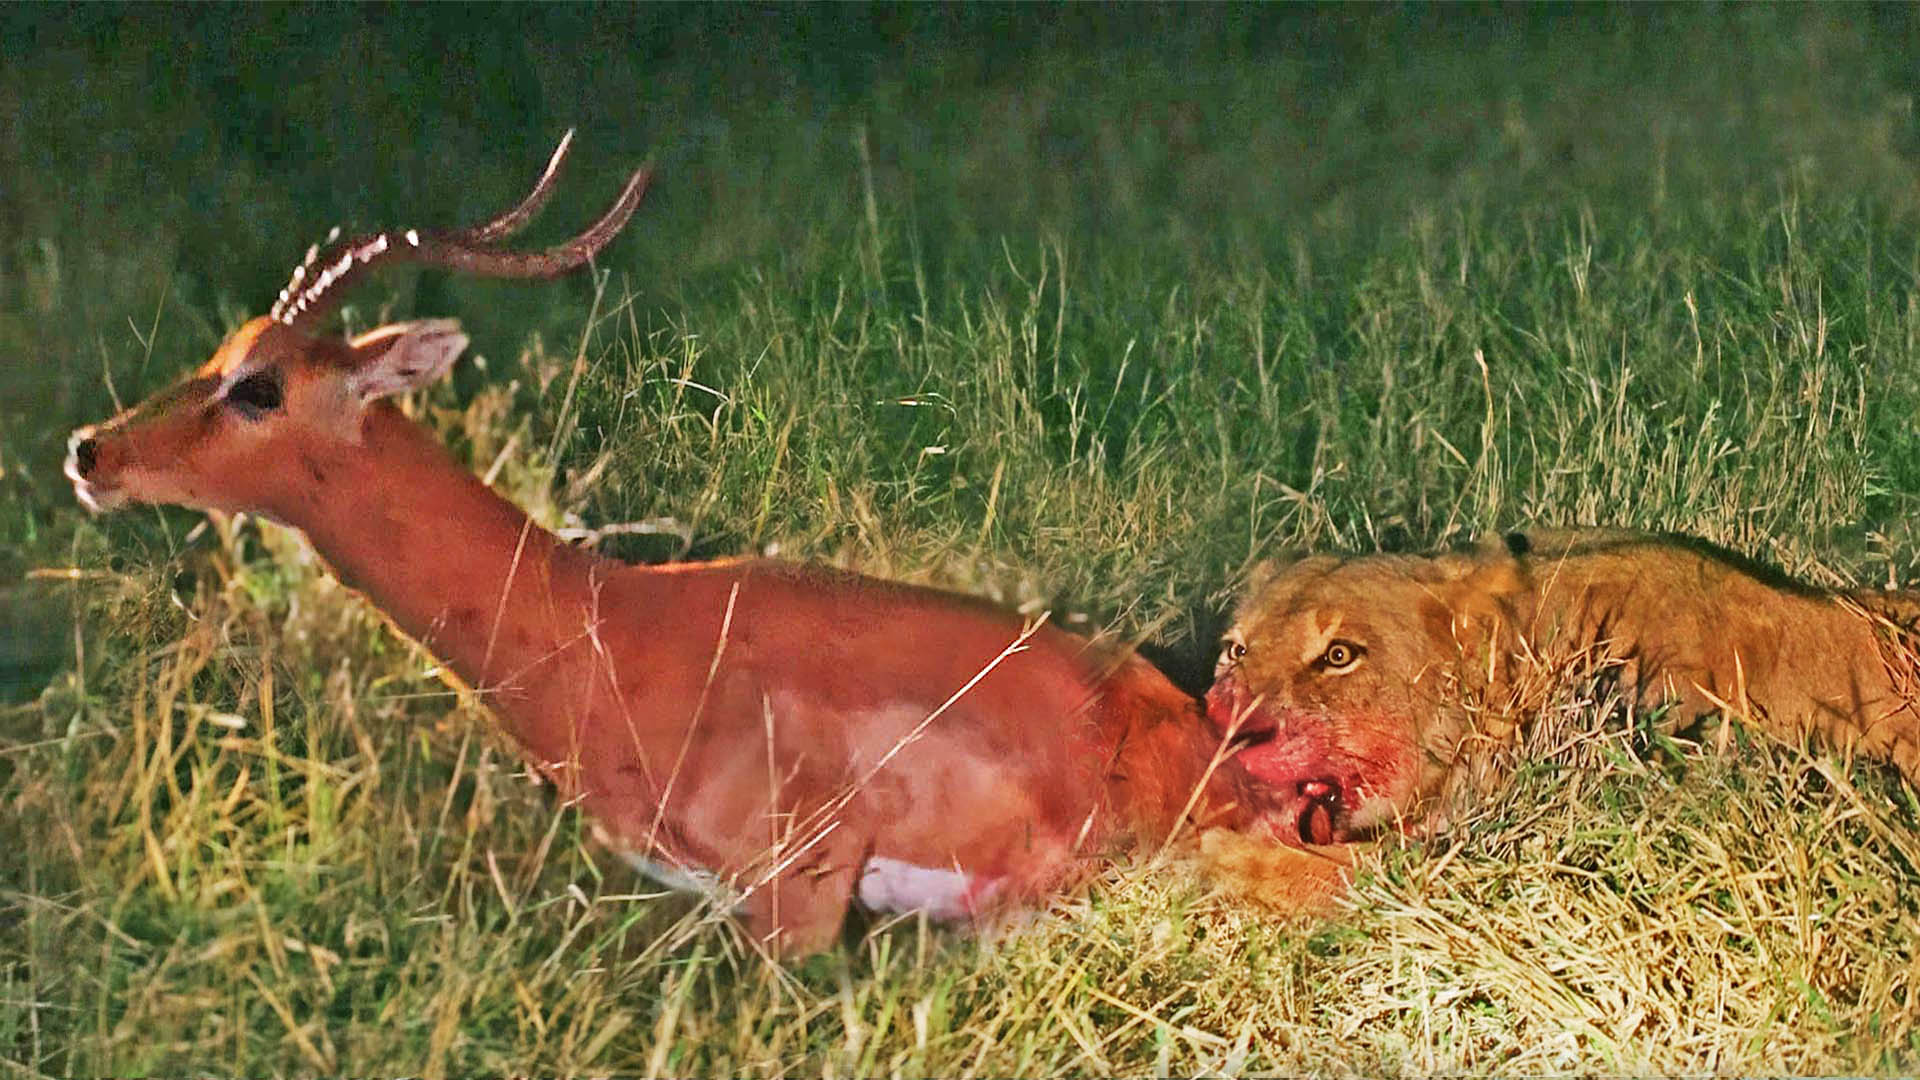 Impala Tries to Escape Lioness While She Eats It